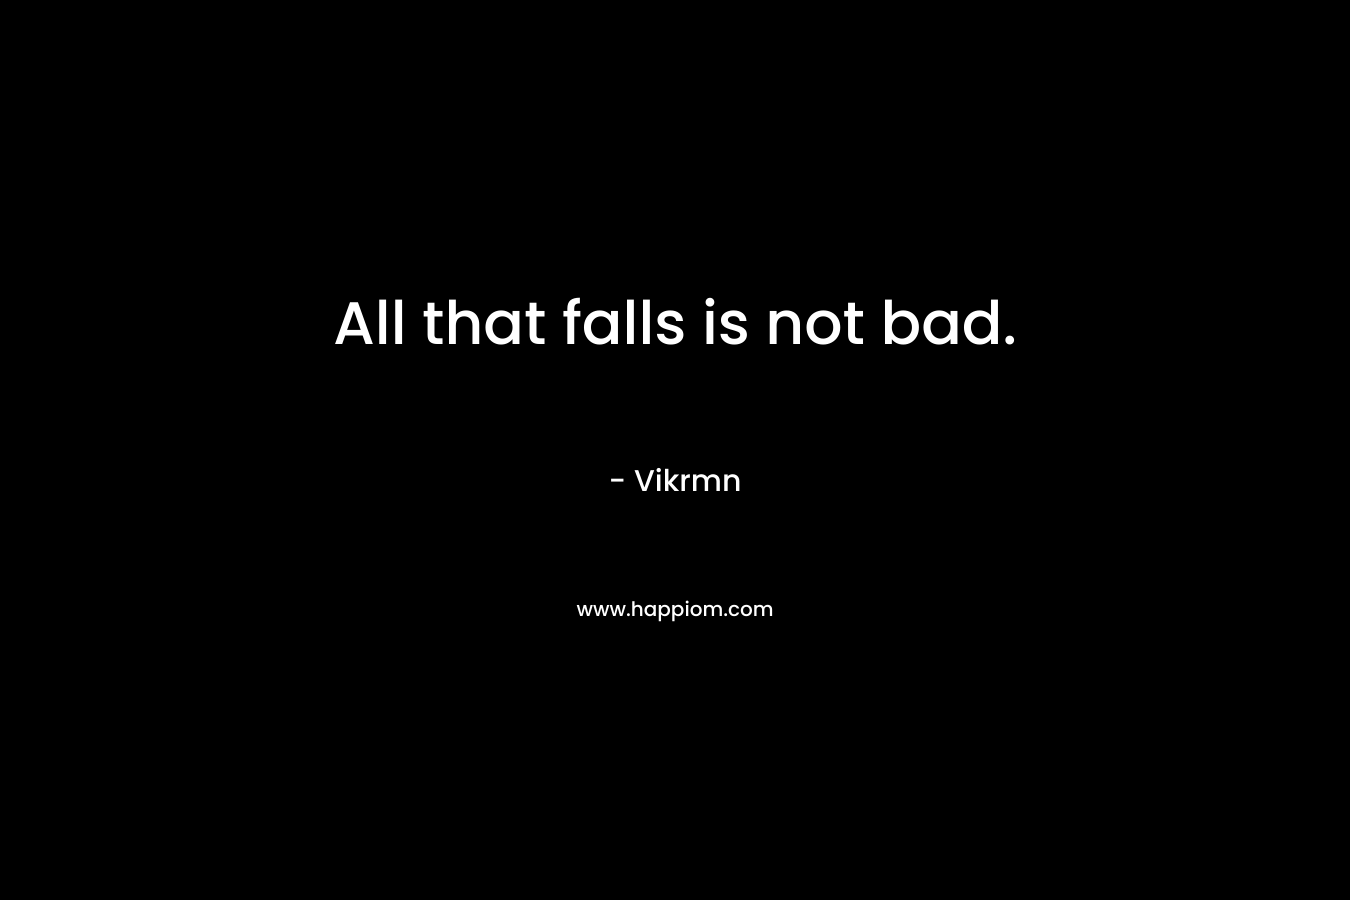 All that falls is not bad.